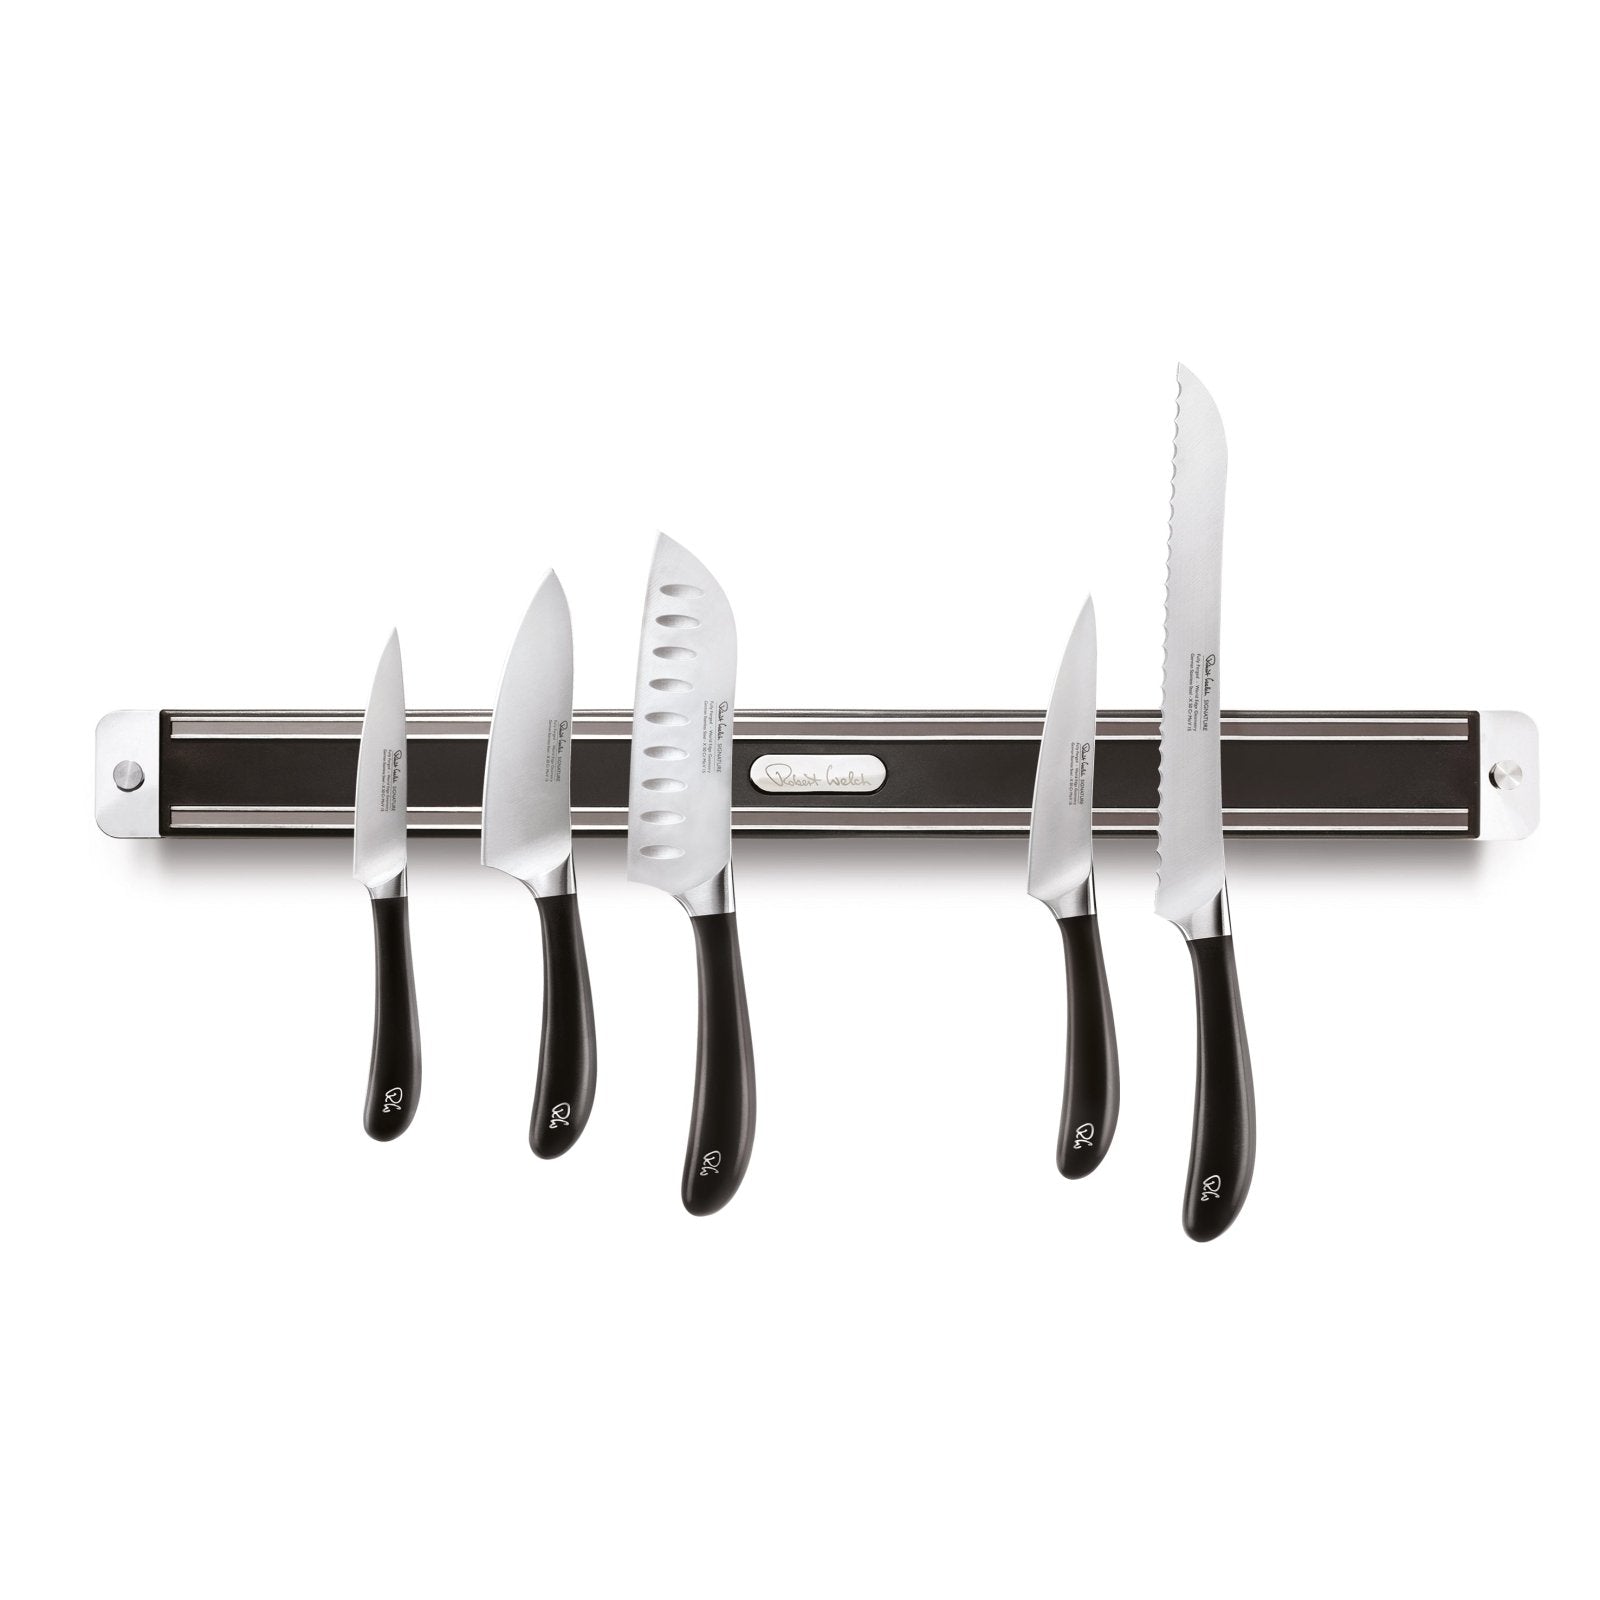 Robert Welch Signature Magnetic Knife Rack - SIGSA2111V - The Cotswold Knife Company